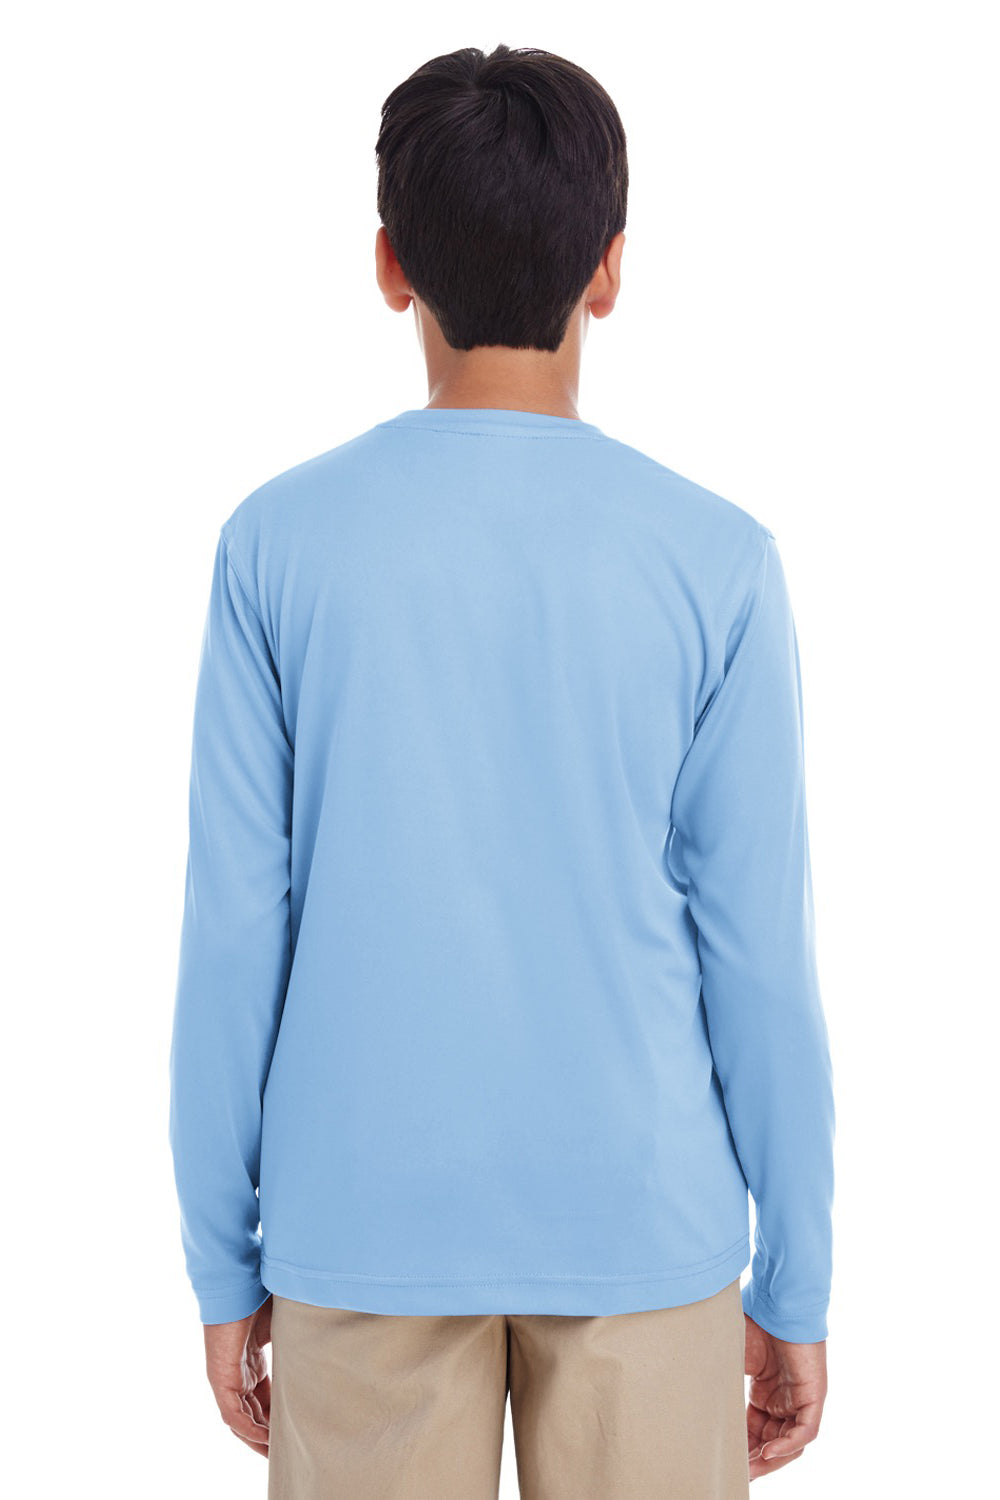 UltraClub 8622Y Youth Cool & Dry Performance Moisture Wicking Long Sleeve Crewneck T-Shirt Columbia Blue Back